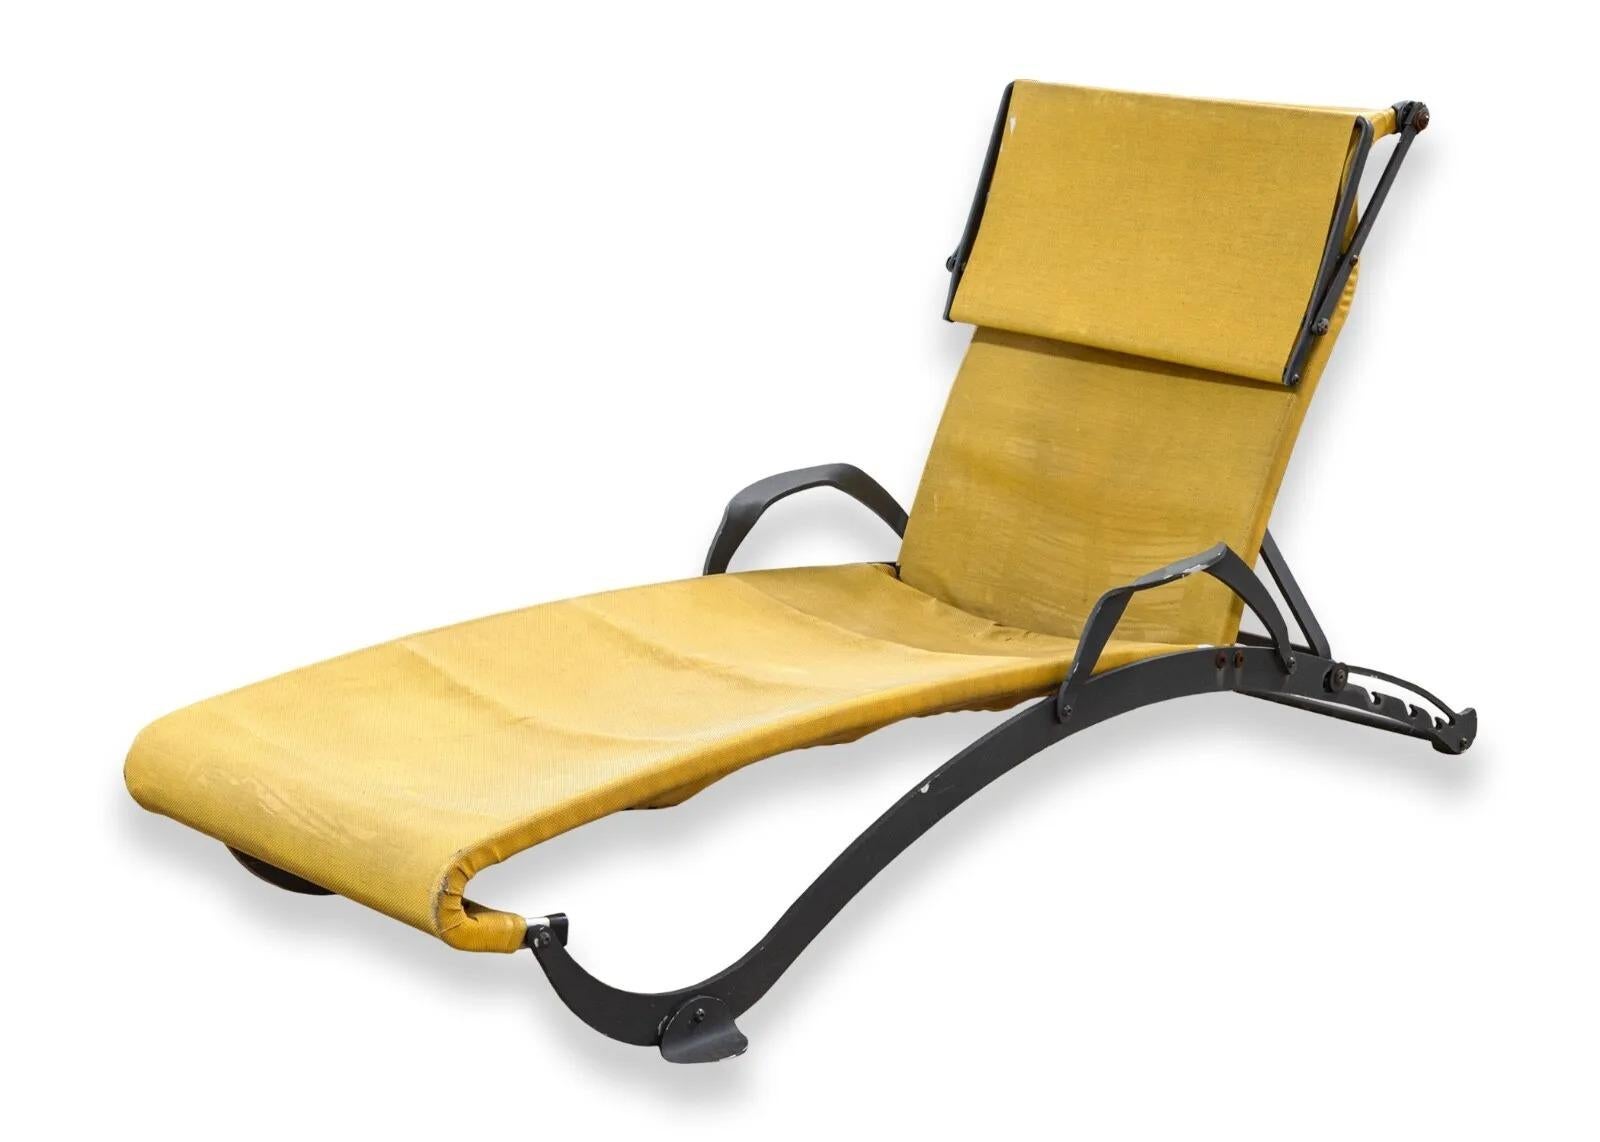 The Outdoor Reclining Sun Lounge Chairs by Five Stars Italy offer a perfect blend of comfort and style for any outdoor space, with a vibrant yellow fabric that stands out against the durable black metal frame. These chairs are designed with an